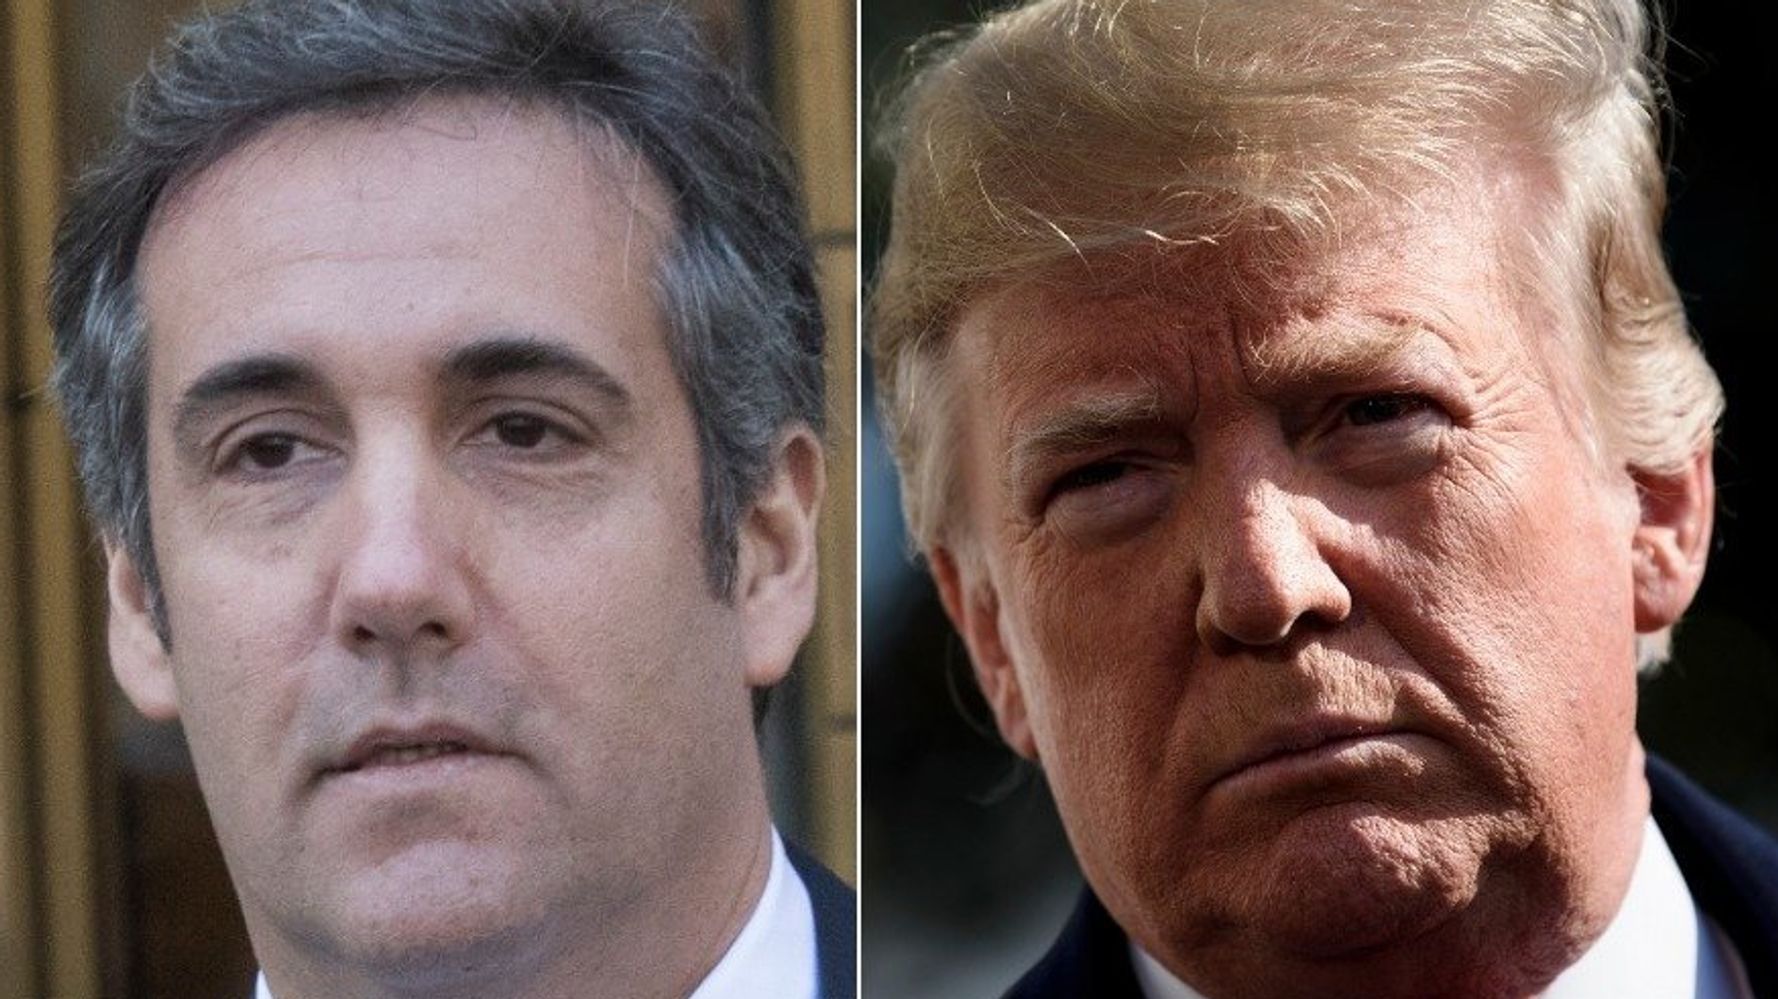 Michael Cohen Reveals The Family Member Trump’s About To ‘Throw Under The Bus’